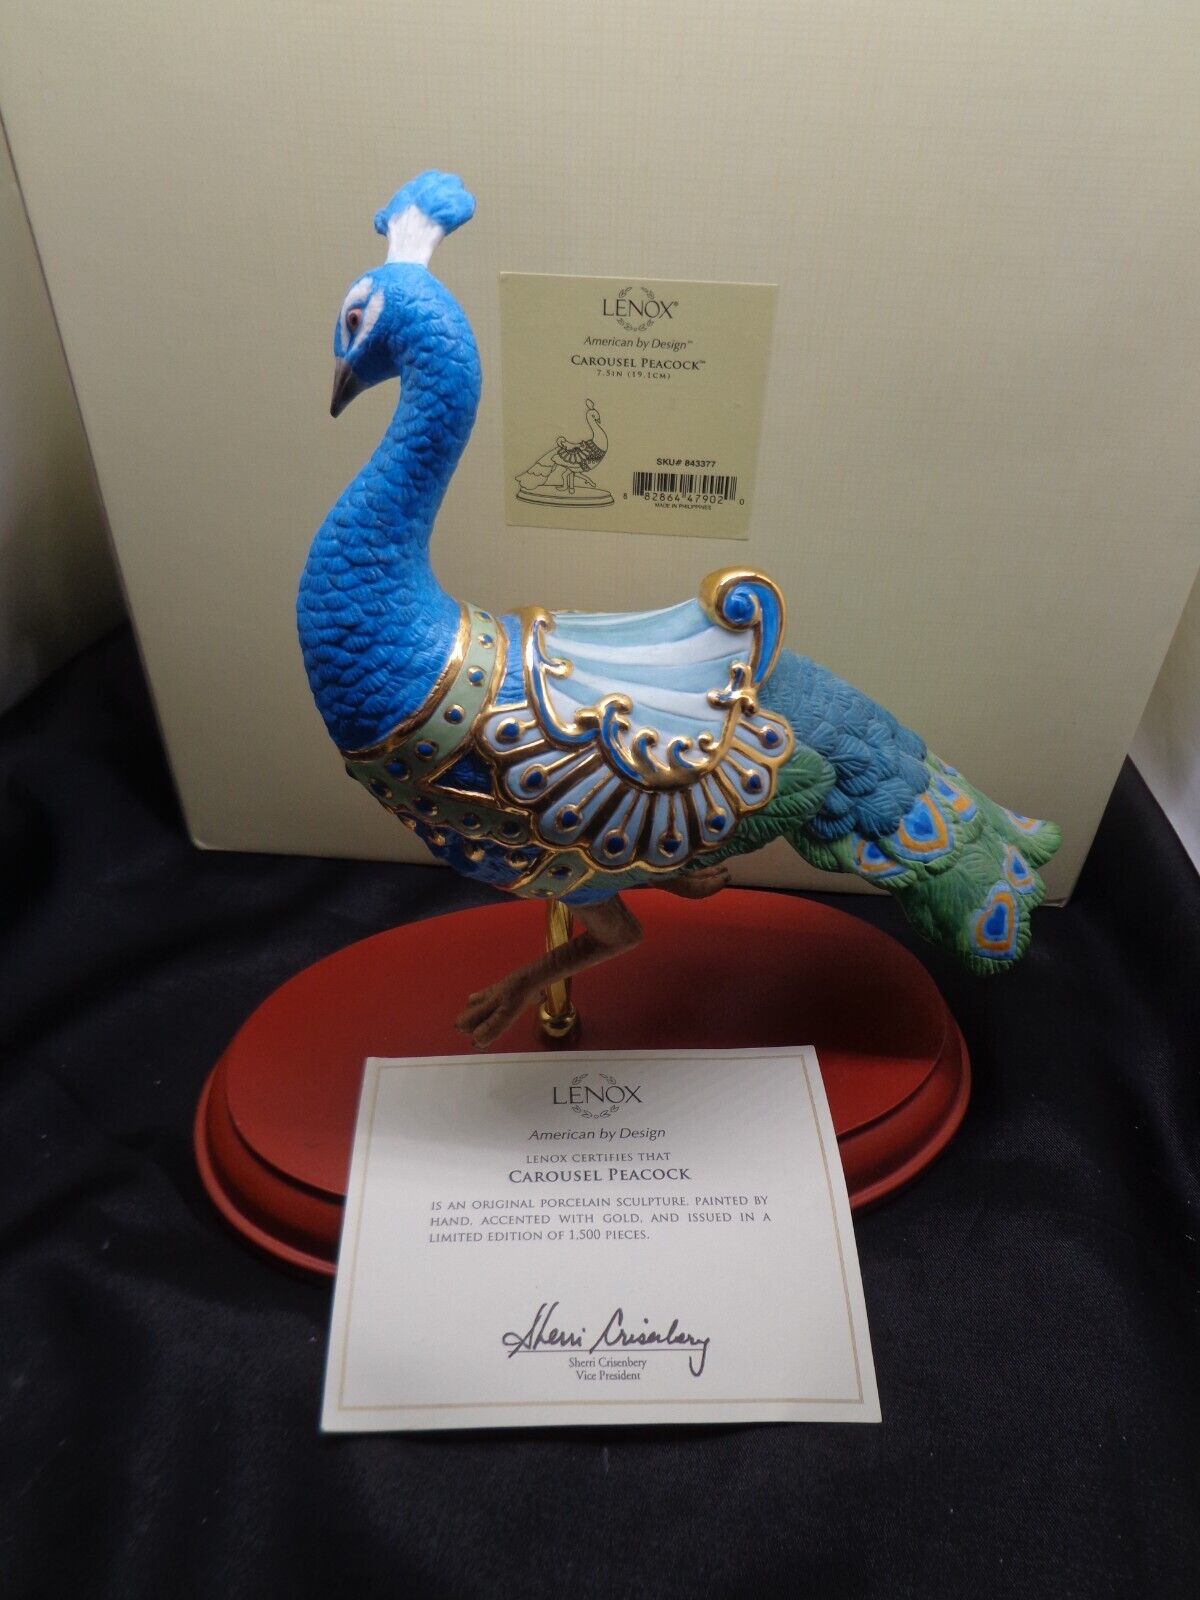 Lenox  Porcelain Limited Edition Carousel PEACOCK - Box, Certificate